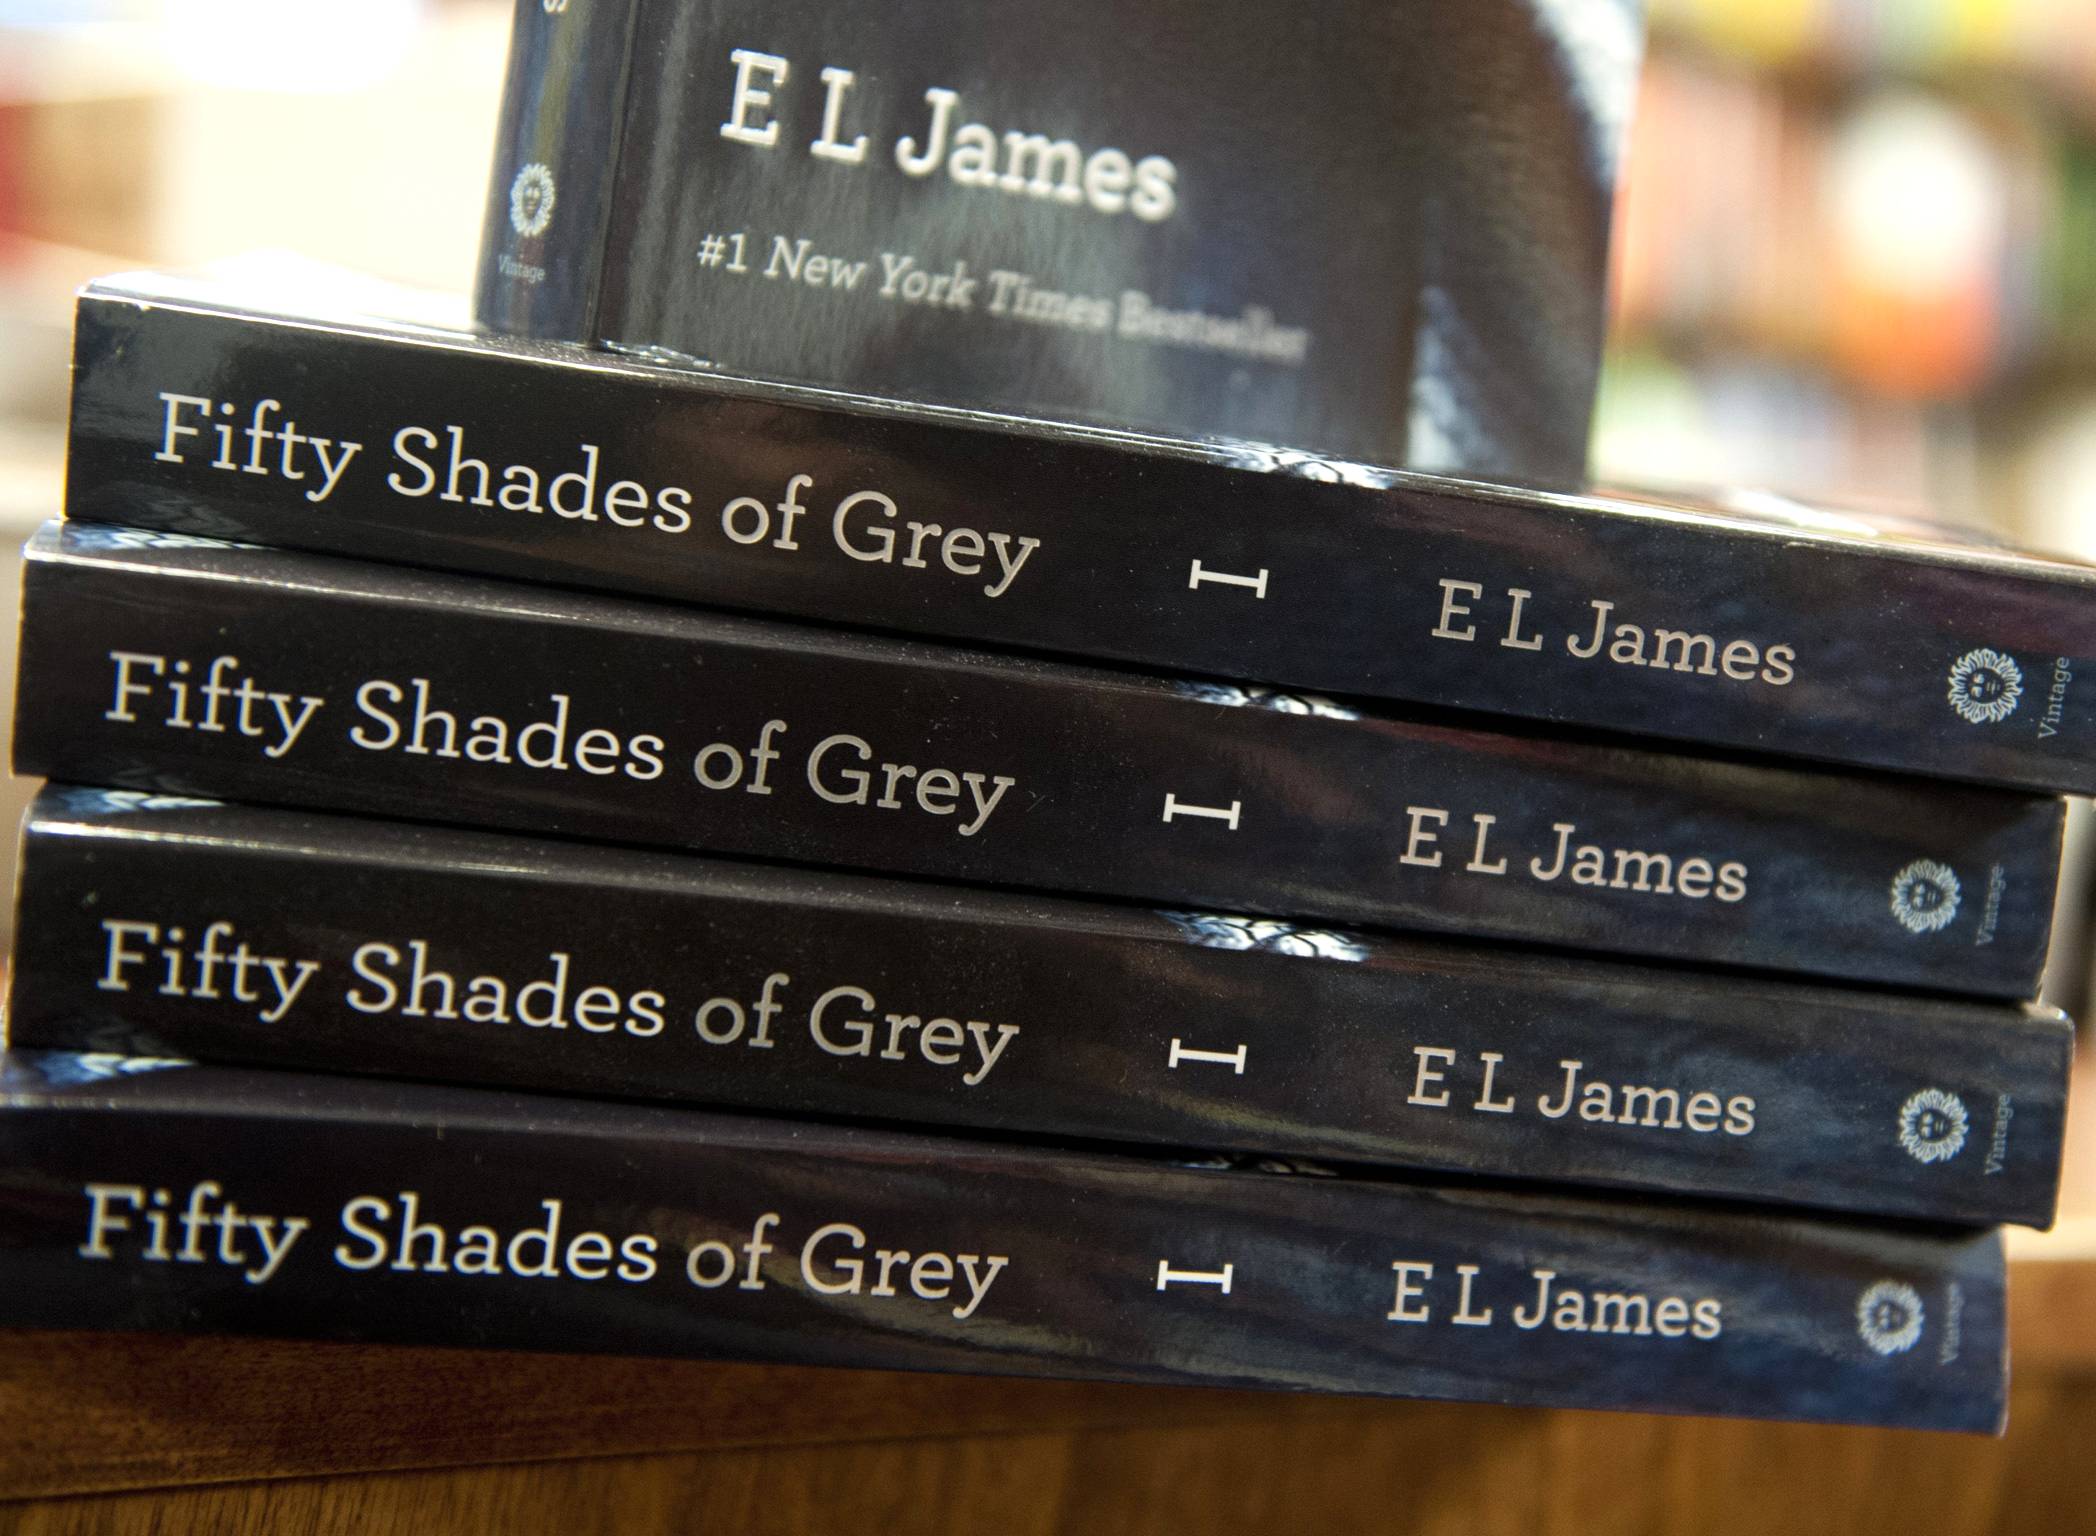 11 March 2012: Erotic romance novel Fifty Shades of Grey, by previously unknown British author EL James, topped the New York Times best-seller list. A limited print run of the book, the first of a trilogy, sold out while the majority of sales were e-book